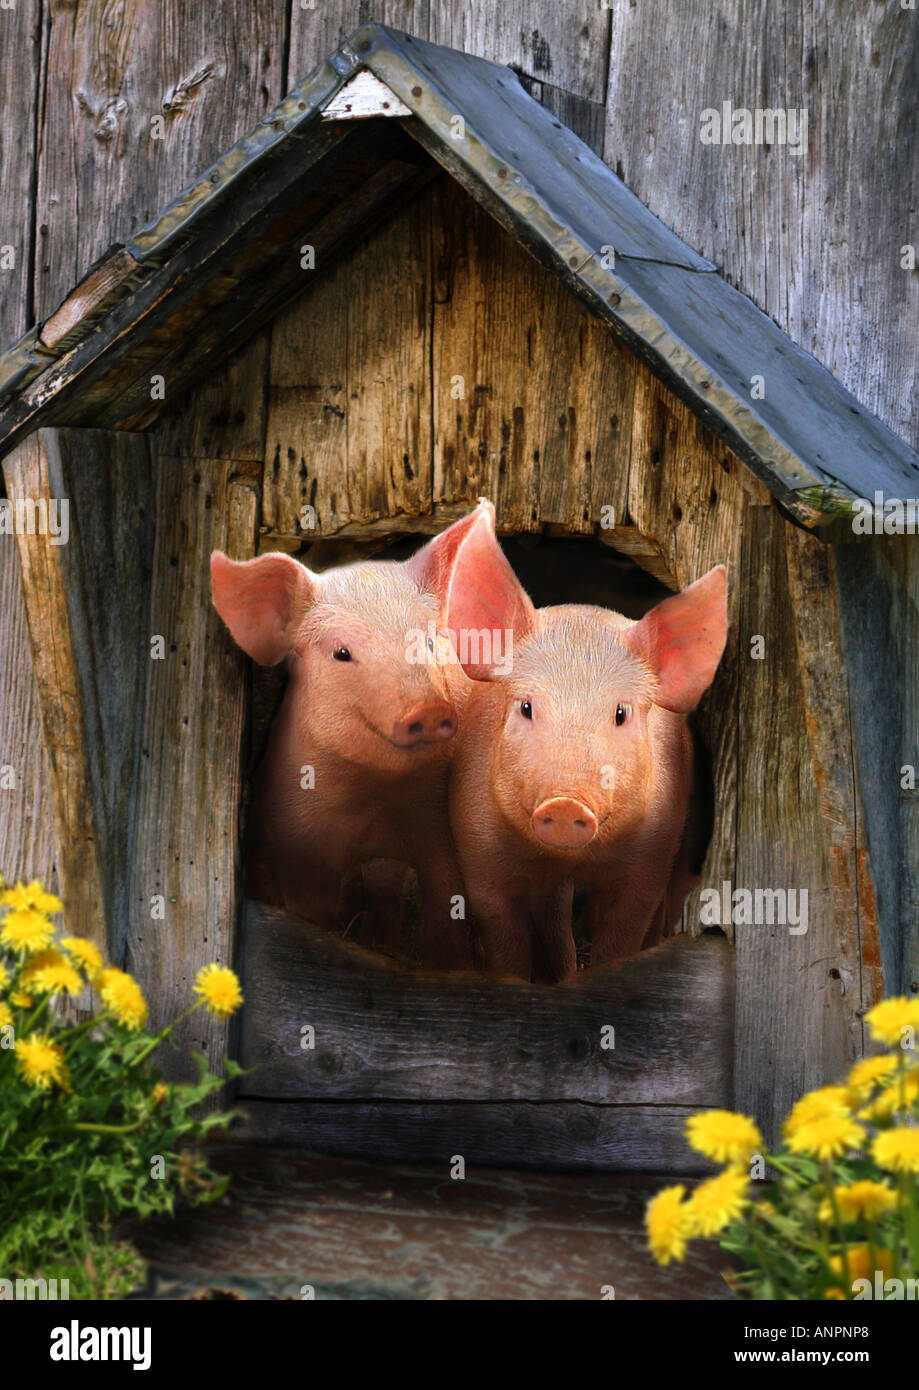 two pigs in dog house Stock Photo